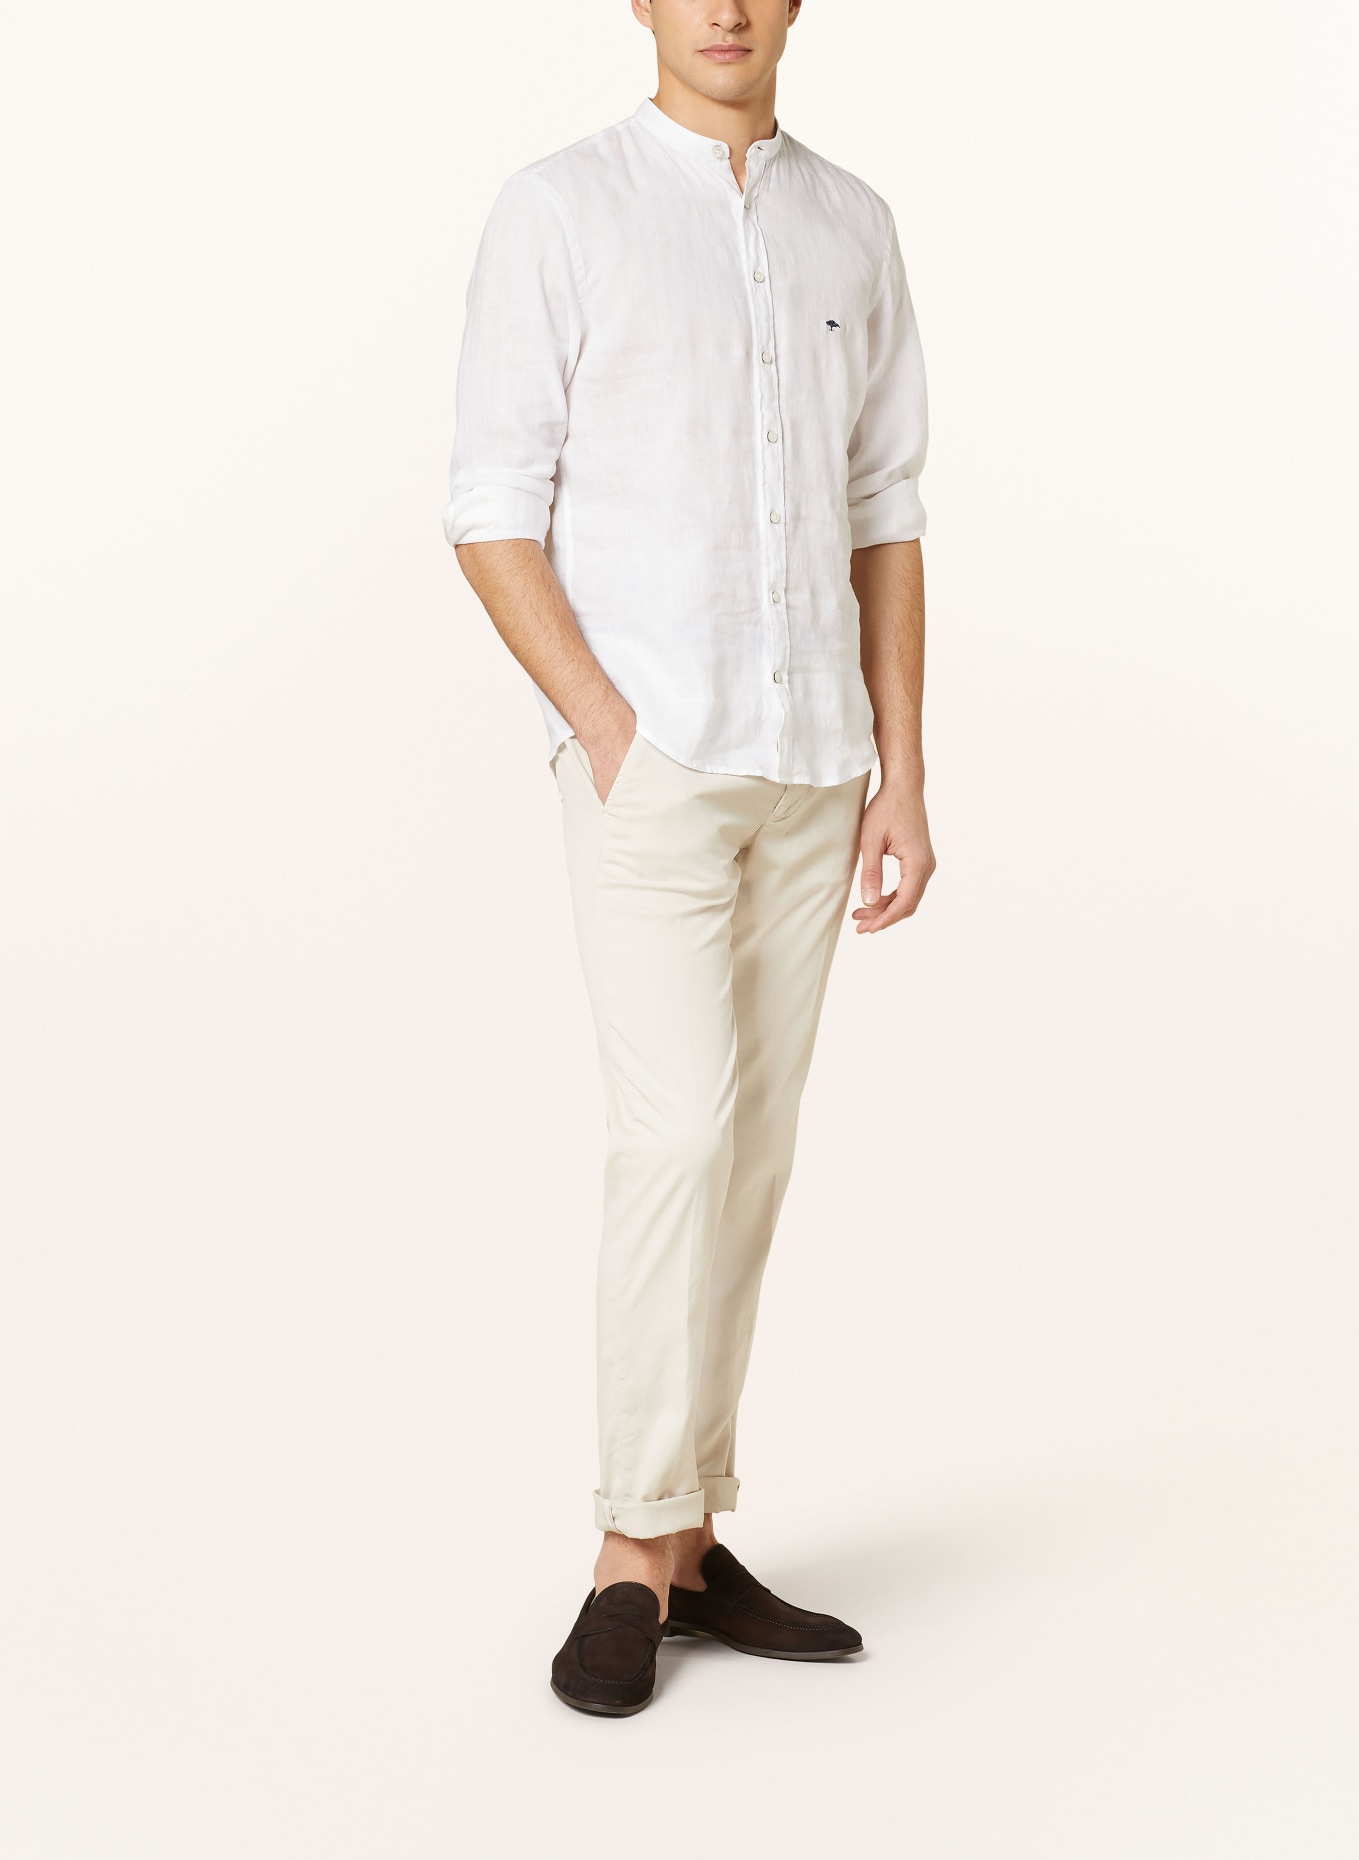 FYNCH-HATTON Linen shirt regular fit with stand-up collar, Color: WHITE (Image 2)